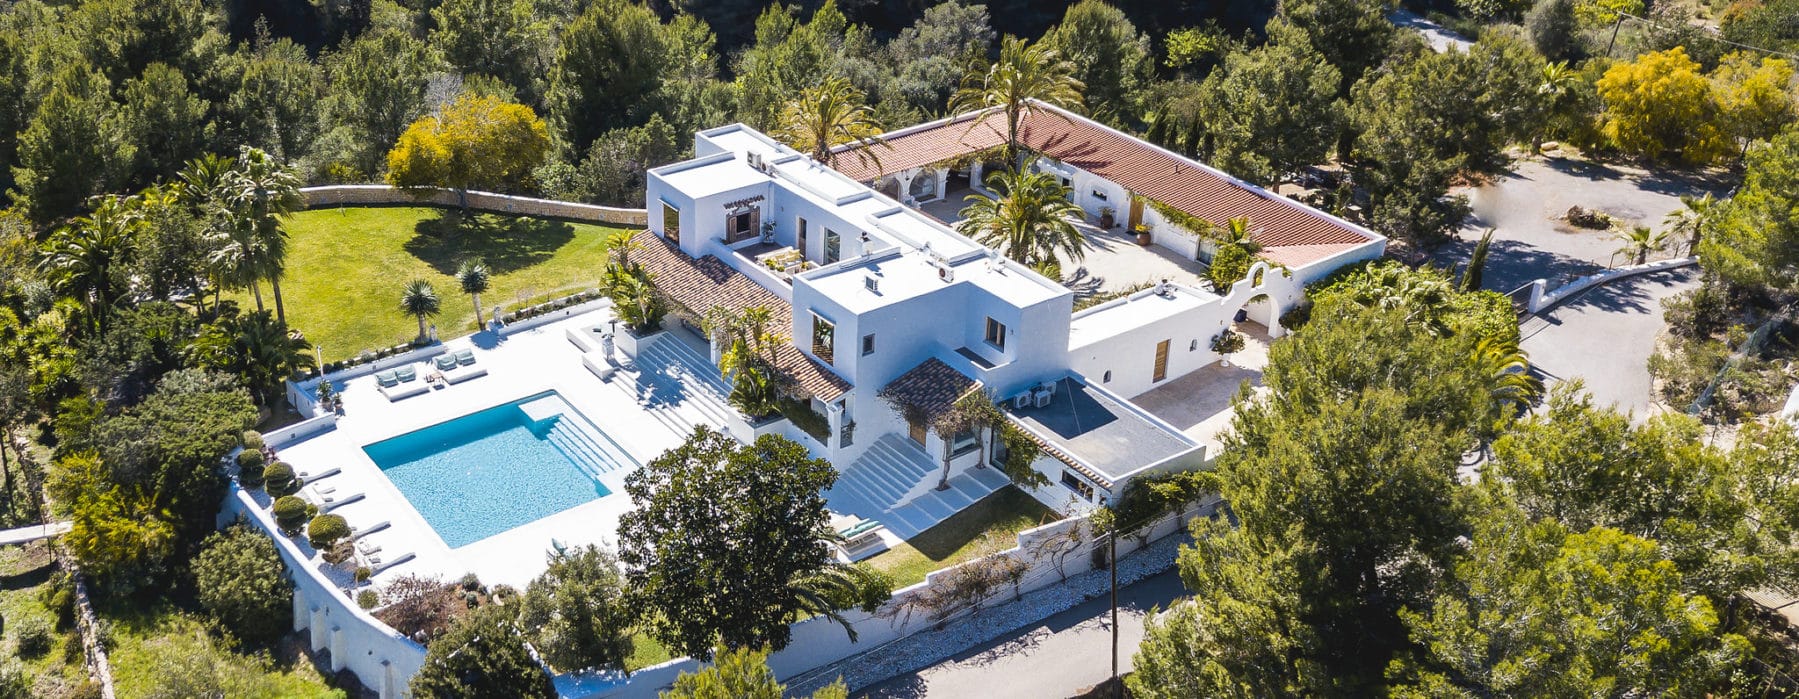 Bird's eye view of whole villa with spacious patio and pool located on a hill